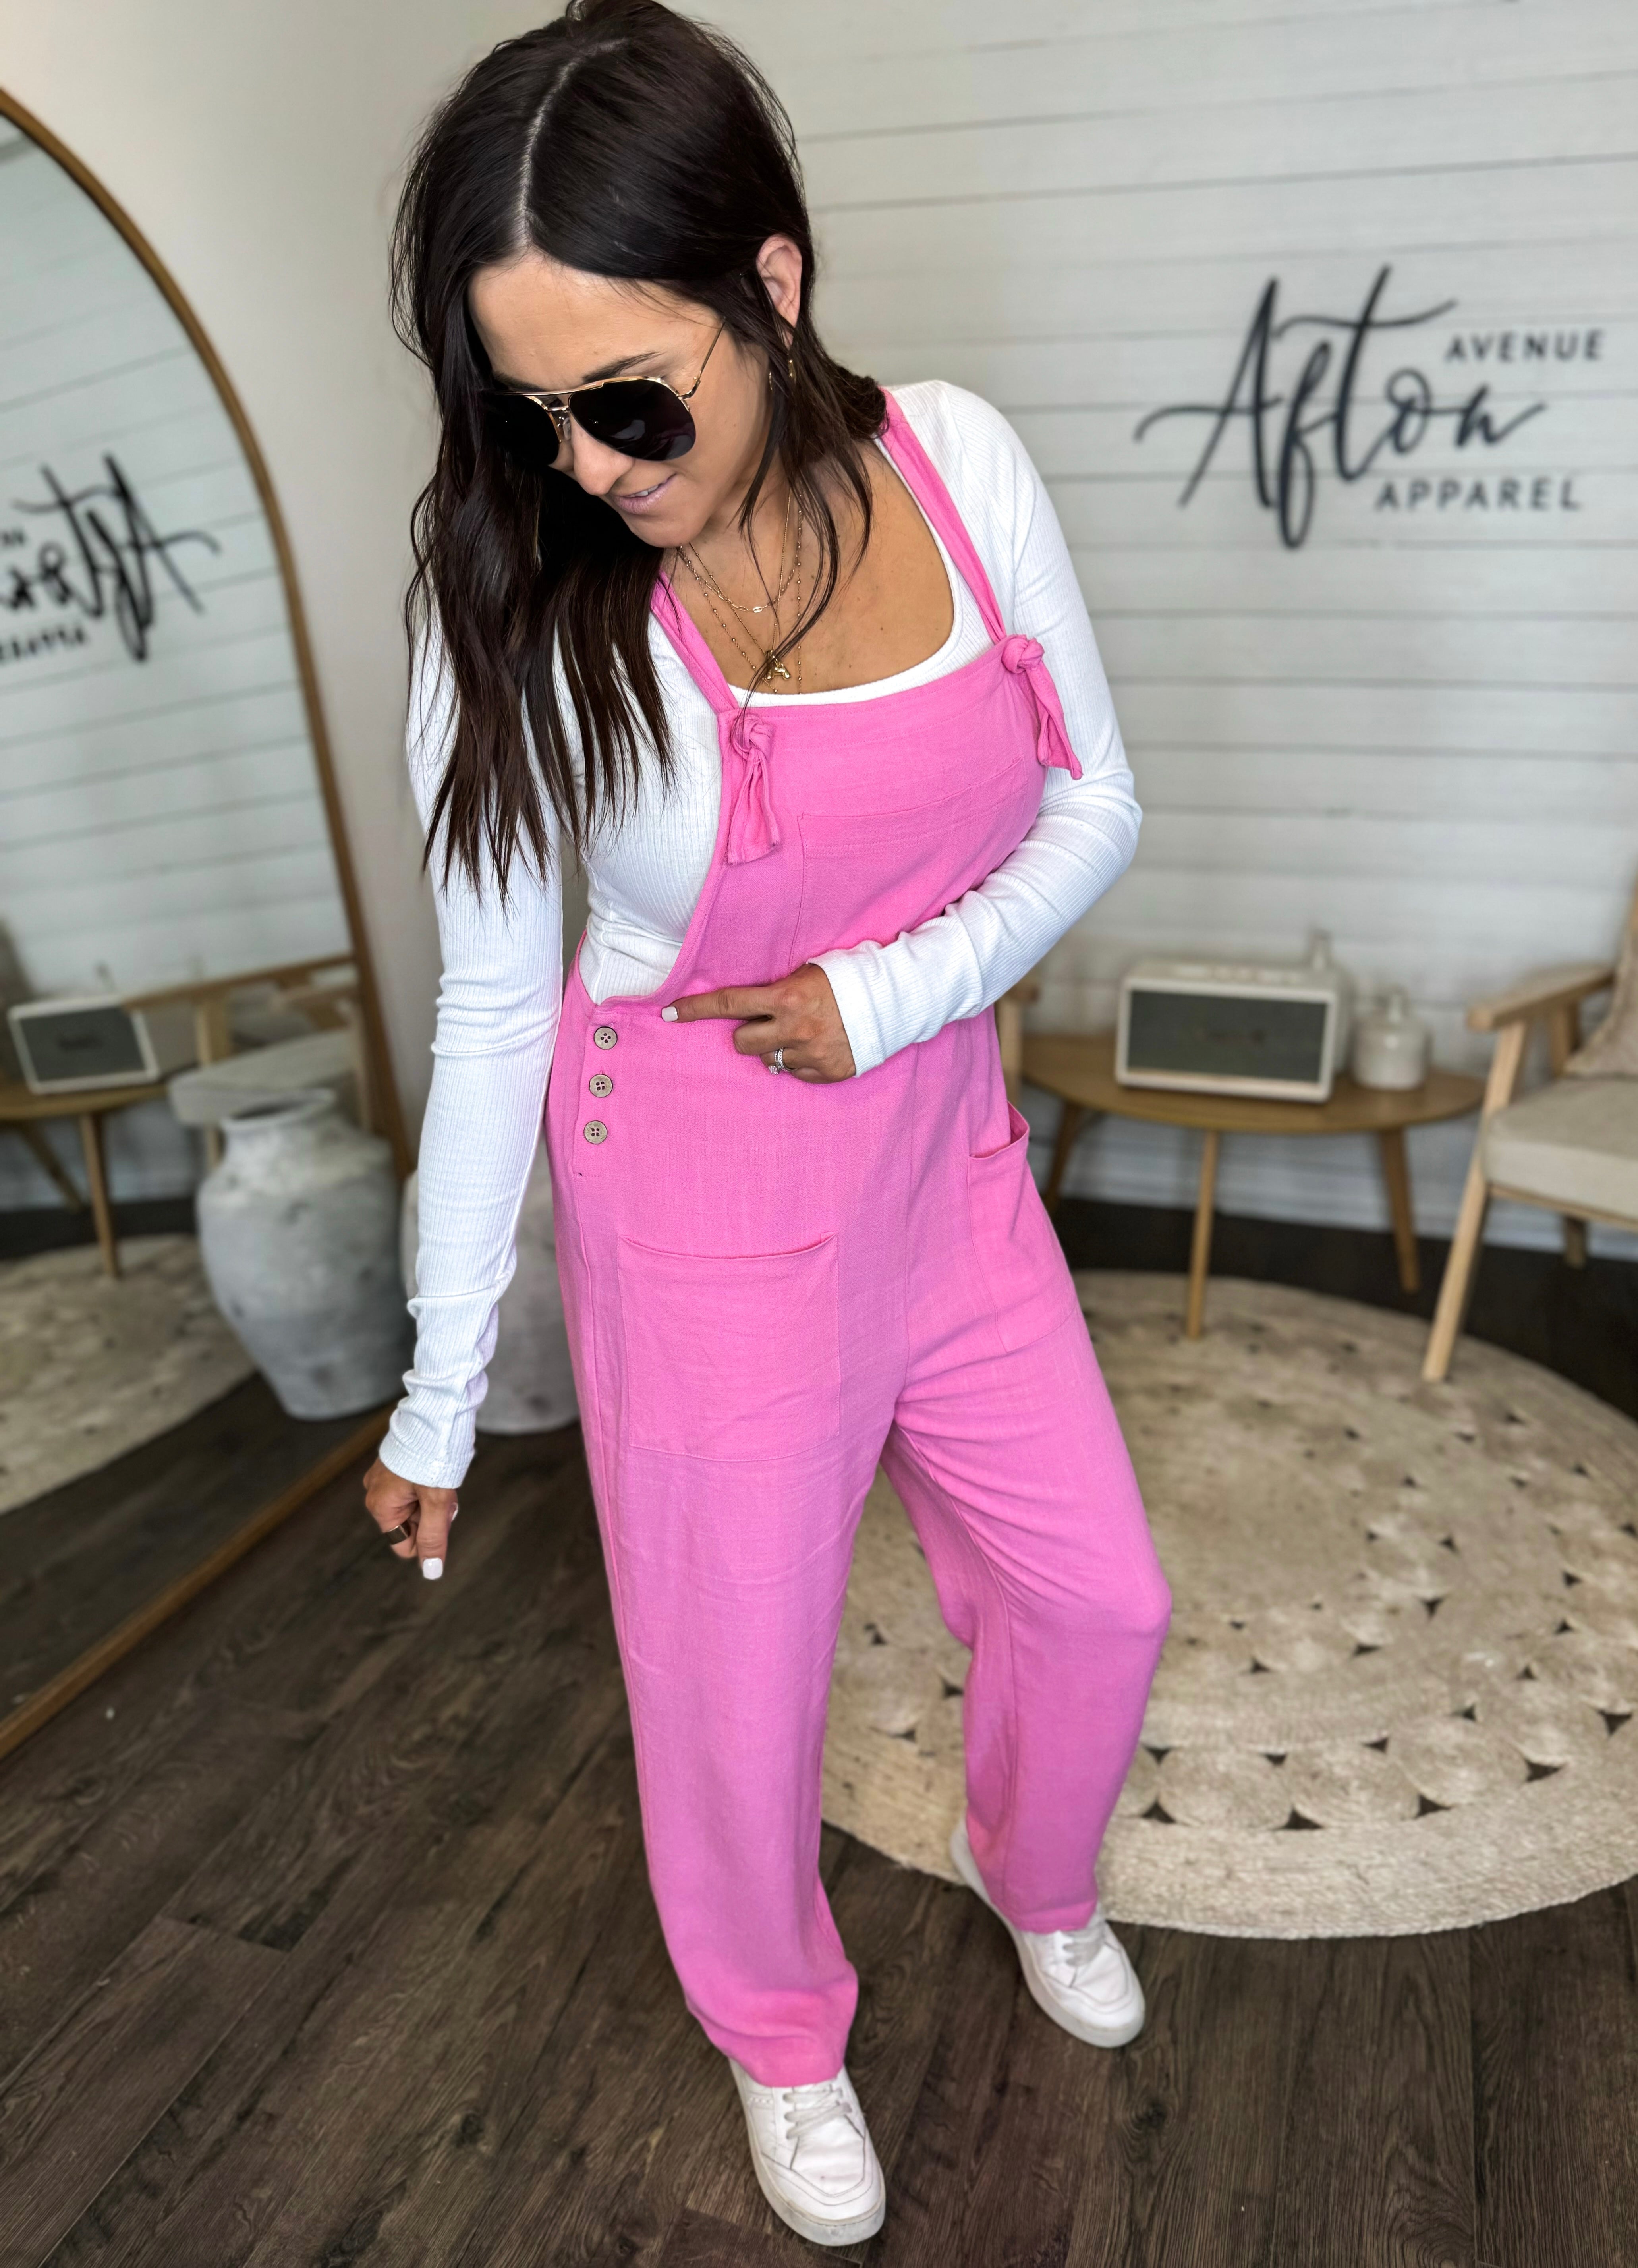 Pour a Little My Way Knotted Jumpsuit